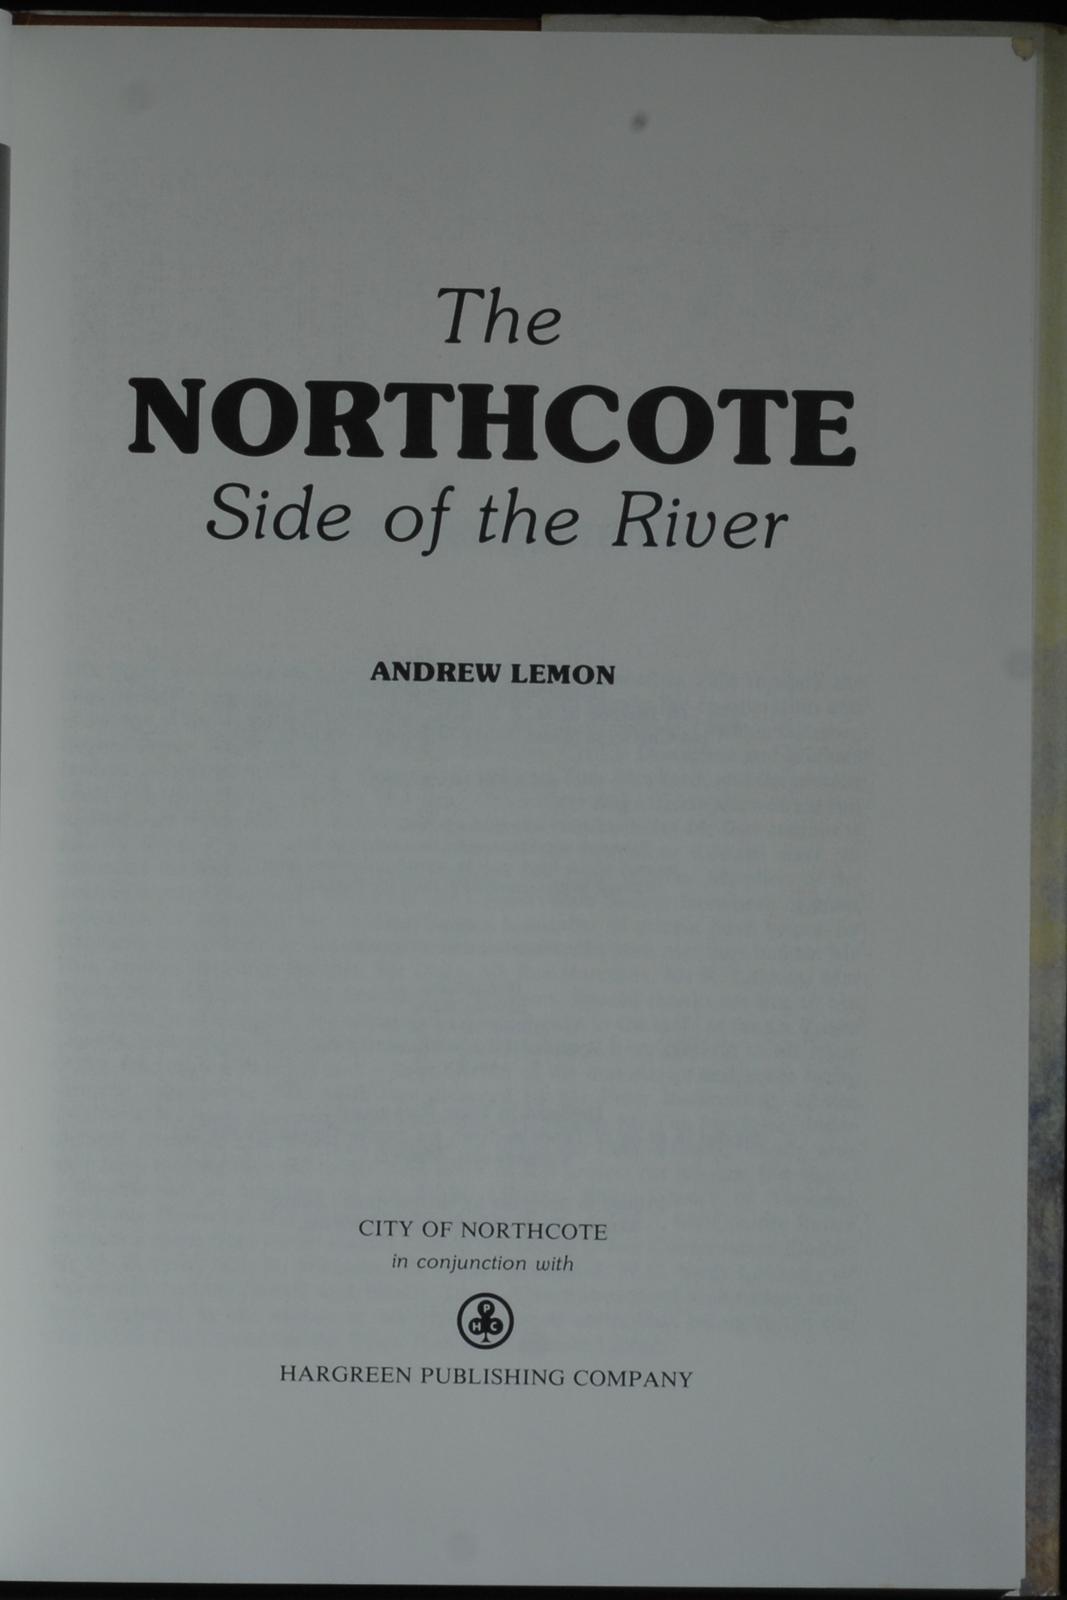 mbb006976c_-_Lemon_Andrew_-_The_Northcote_Side_Of_The_River_-_Contains_Illustrations.jpg